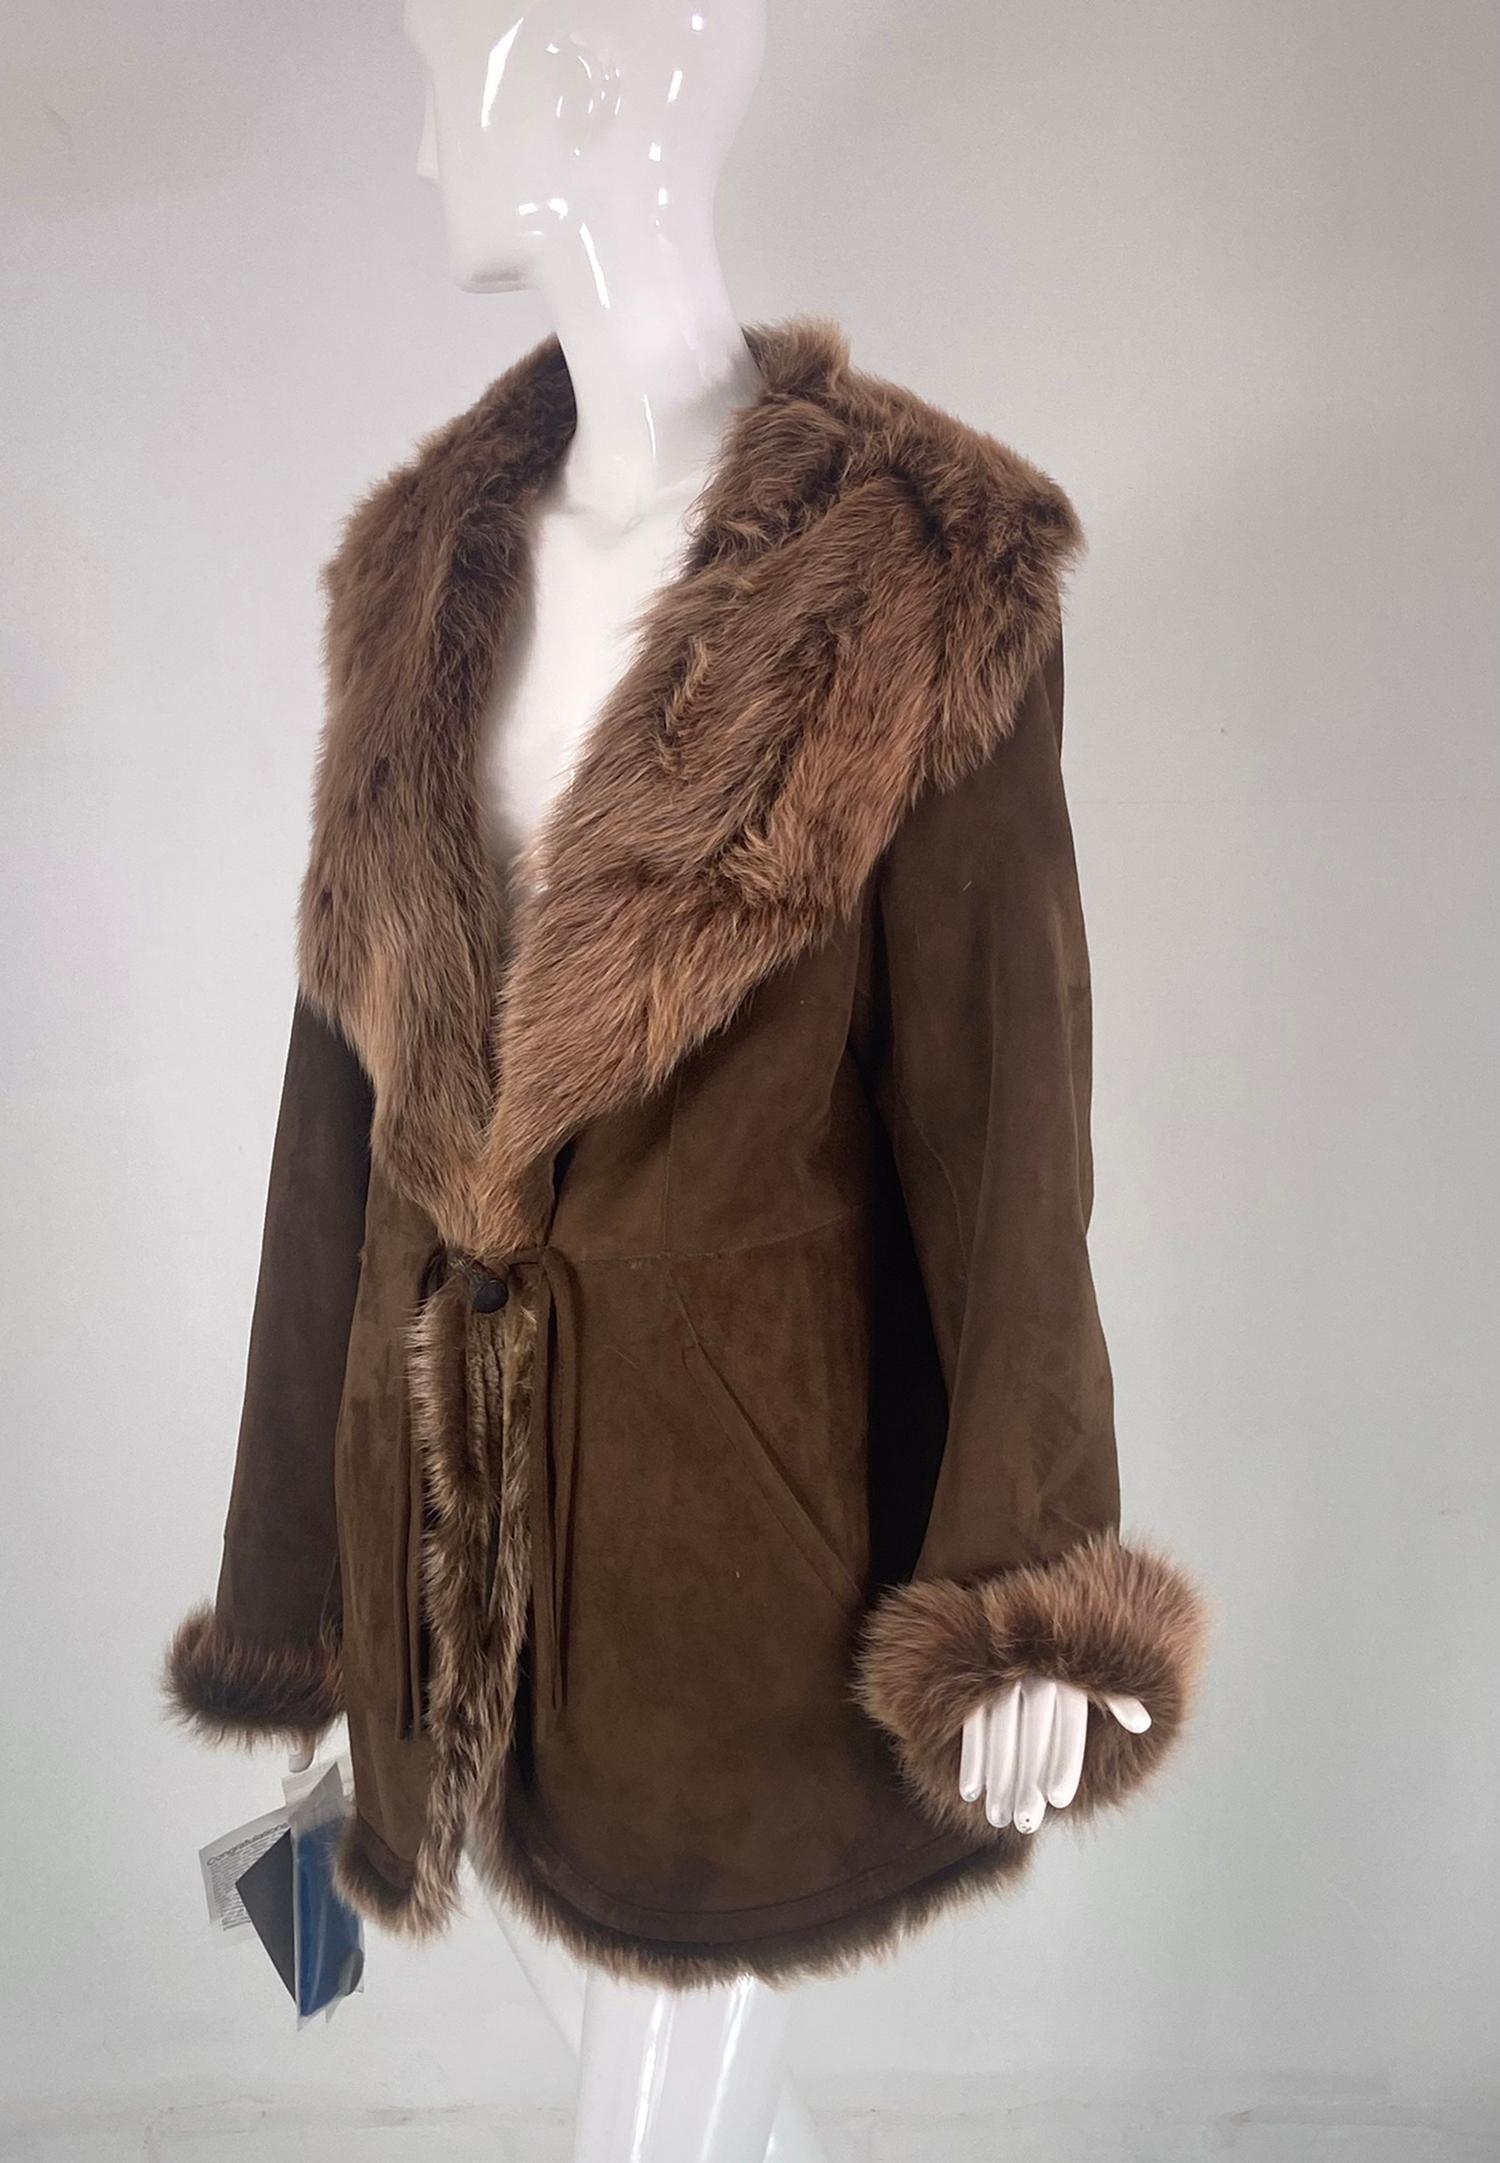 Blue Duck micro Spanish merino light weight shearling coat NWT. A beautiful coat or long jacket with a wide lapel collar of long soft fur, long sleeves with turn back fur cuffs. The coat closes at the waist with a horn button and leather ties, there